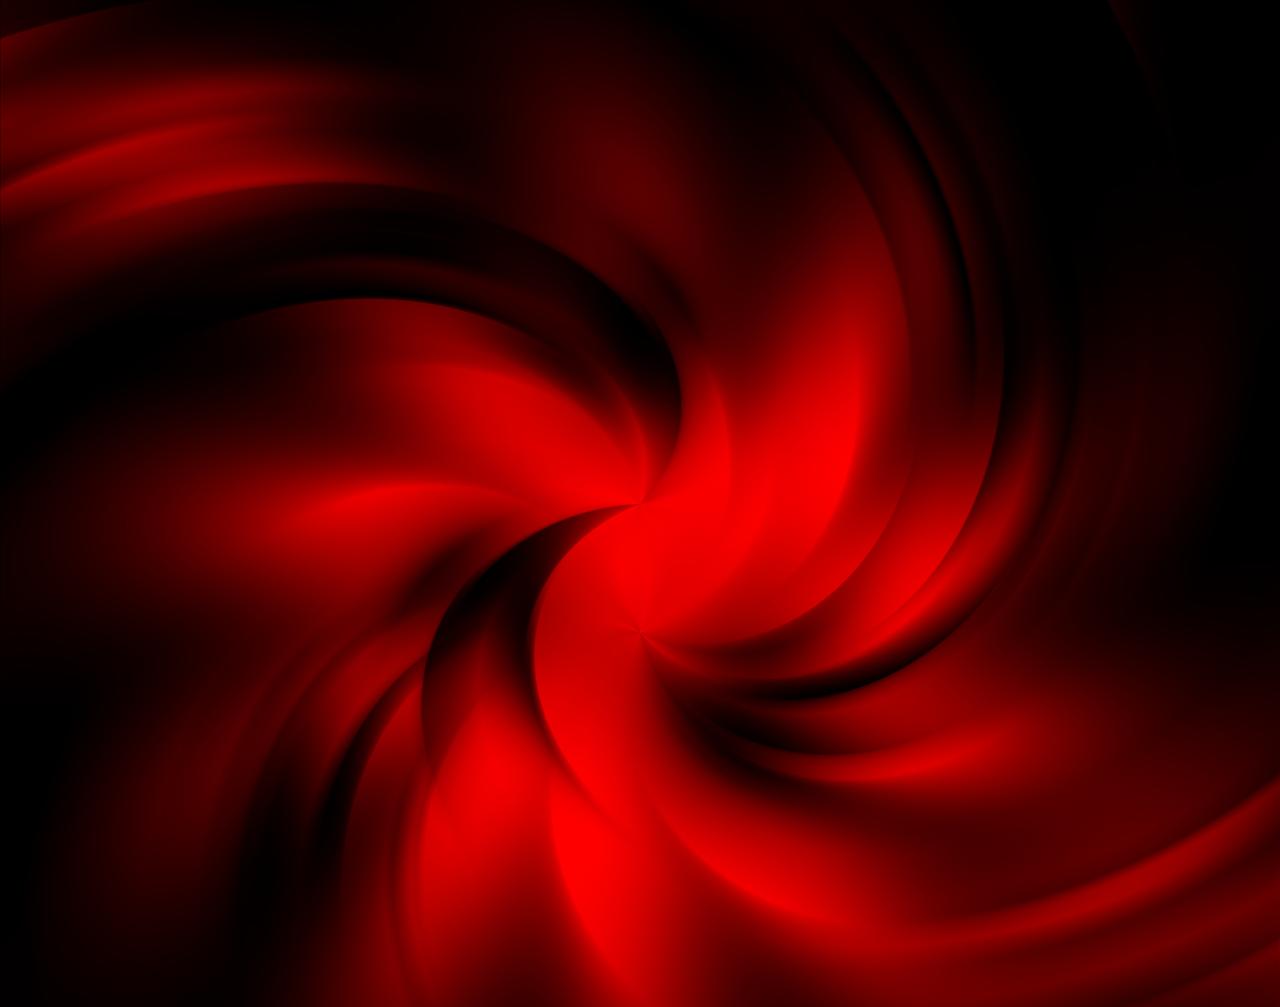 78+] Red And Black Backgrounds - WallpaperSafari